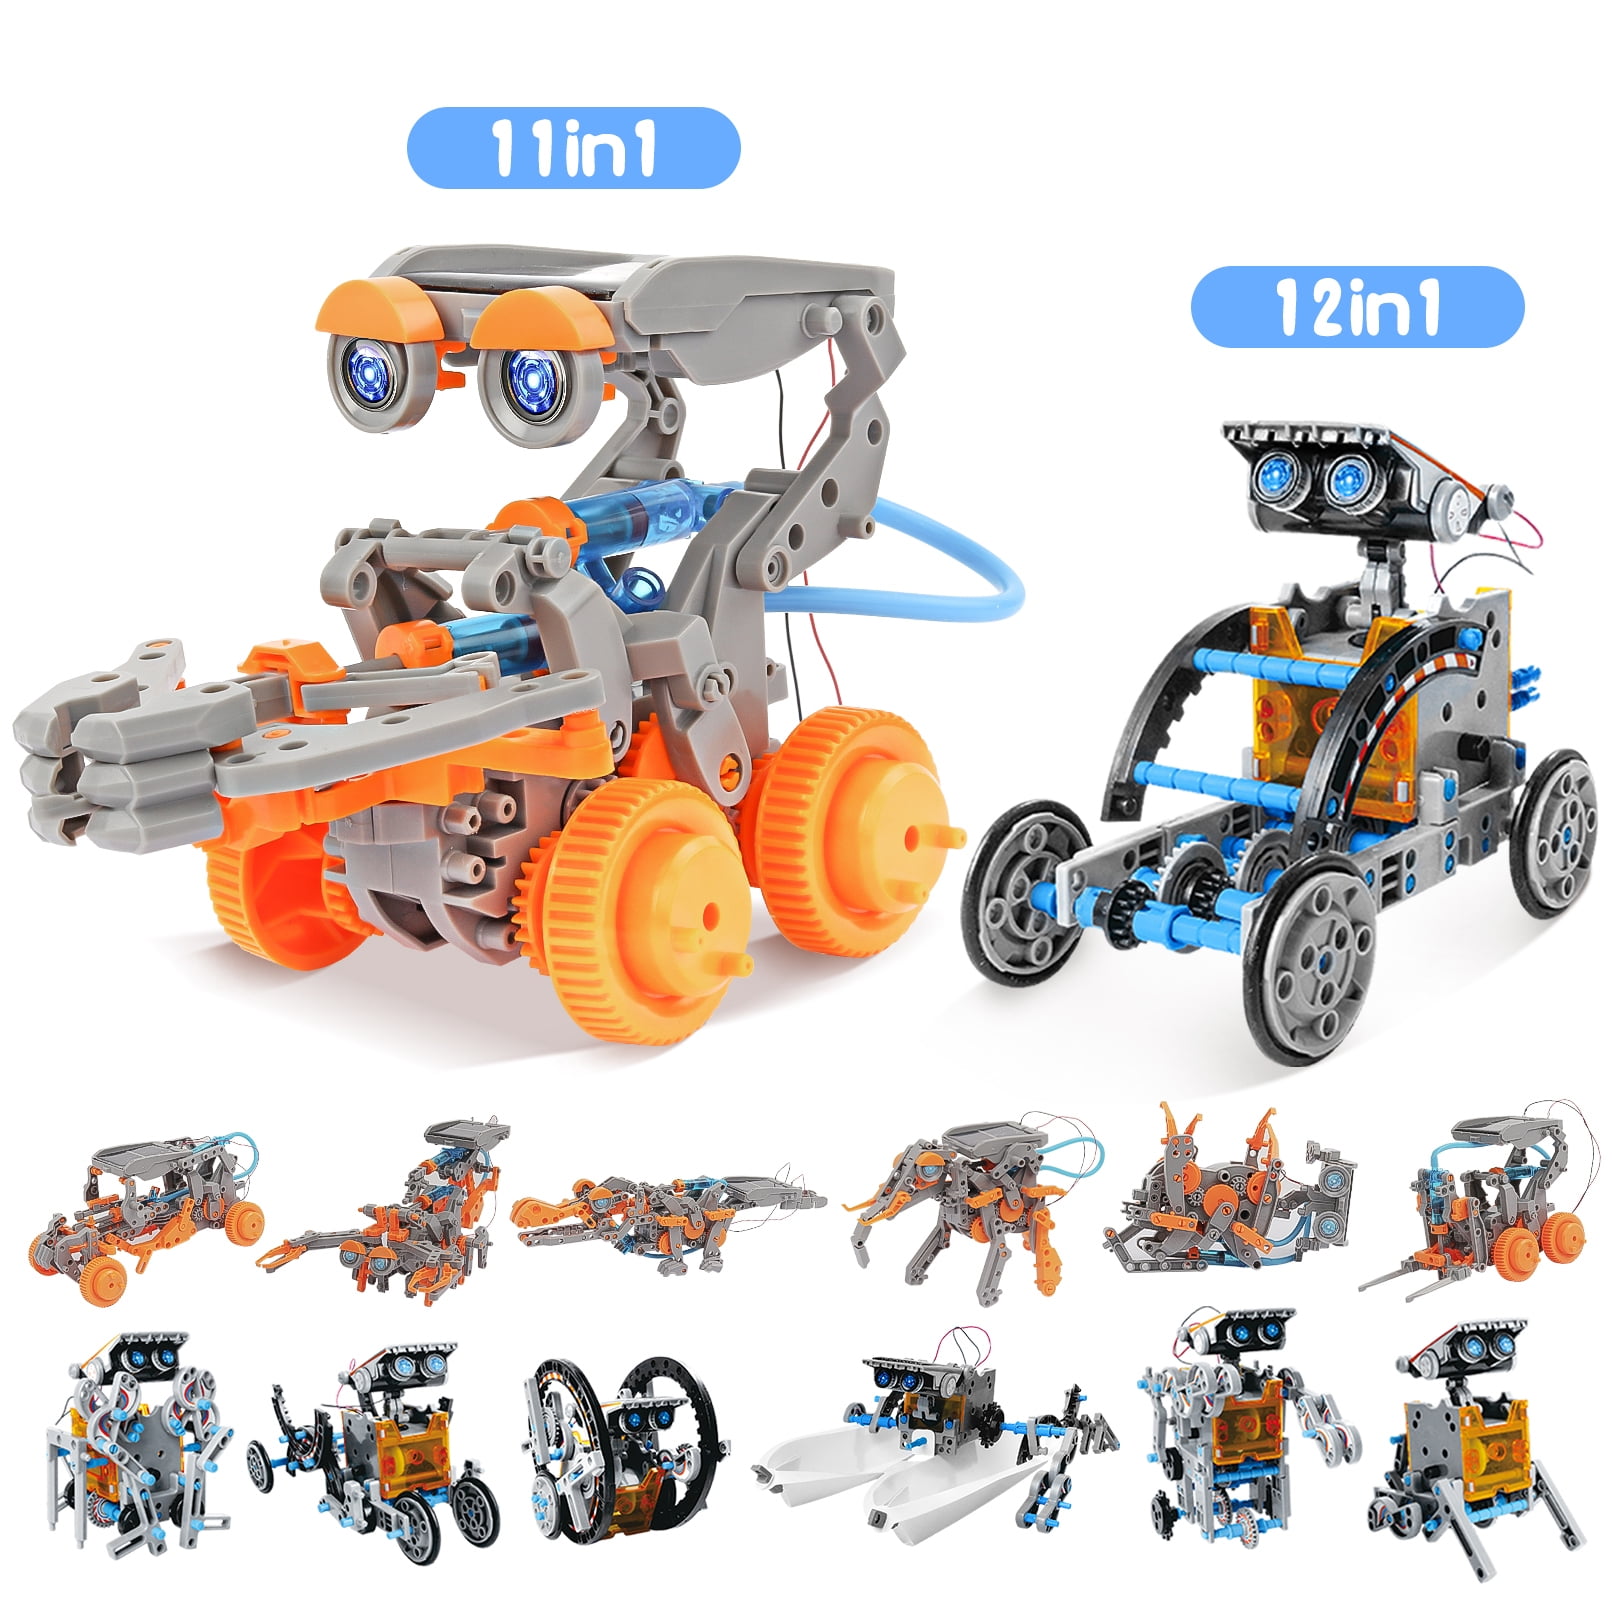 Details about   2Pepers Electric Motor Robotic Science Kits For Kids Diy Stem Toys Kid 4-In-1 